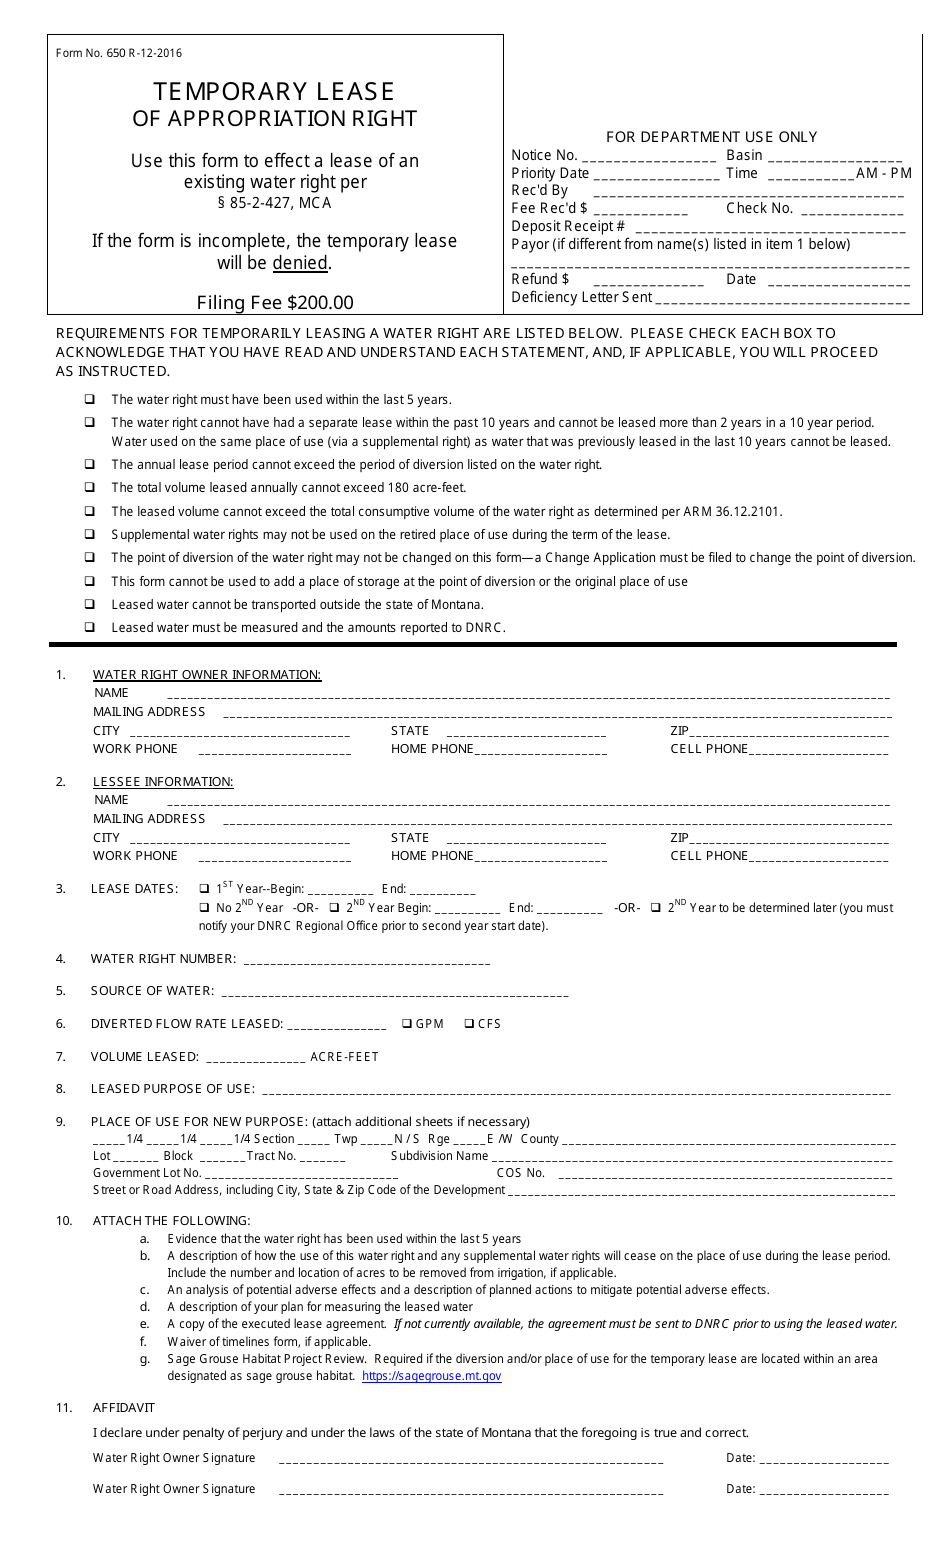 Form 650 Temporary Lease of Appropriation Right - Montana, Page 1